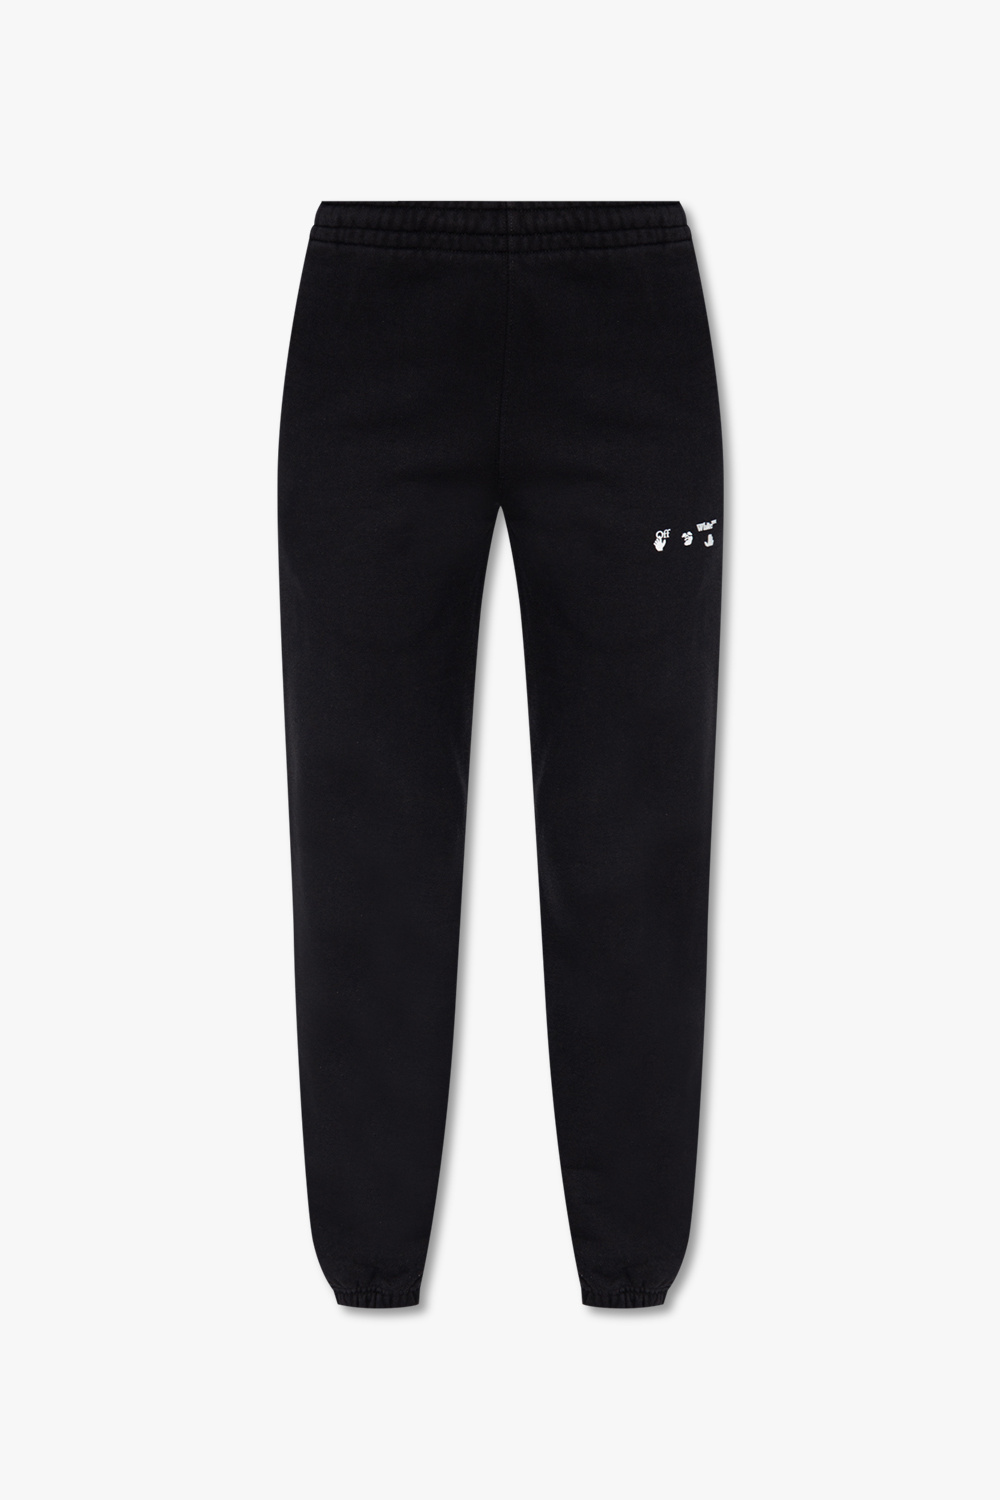 Off-White Sweatpants with logo